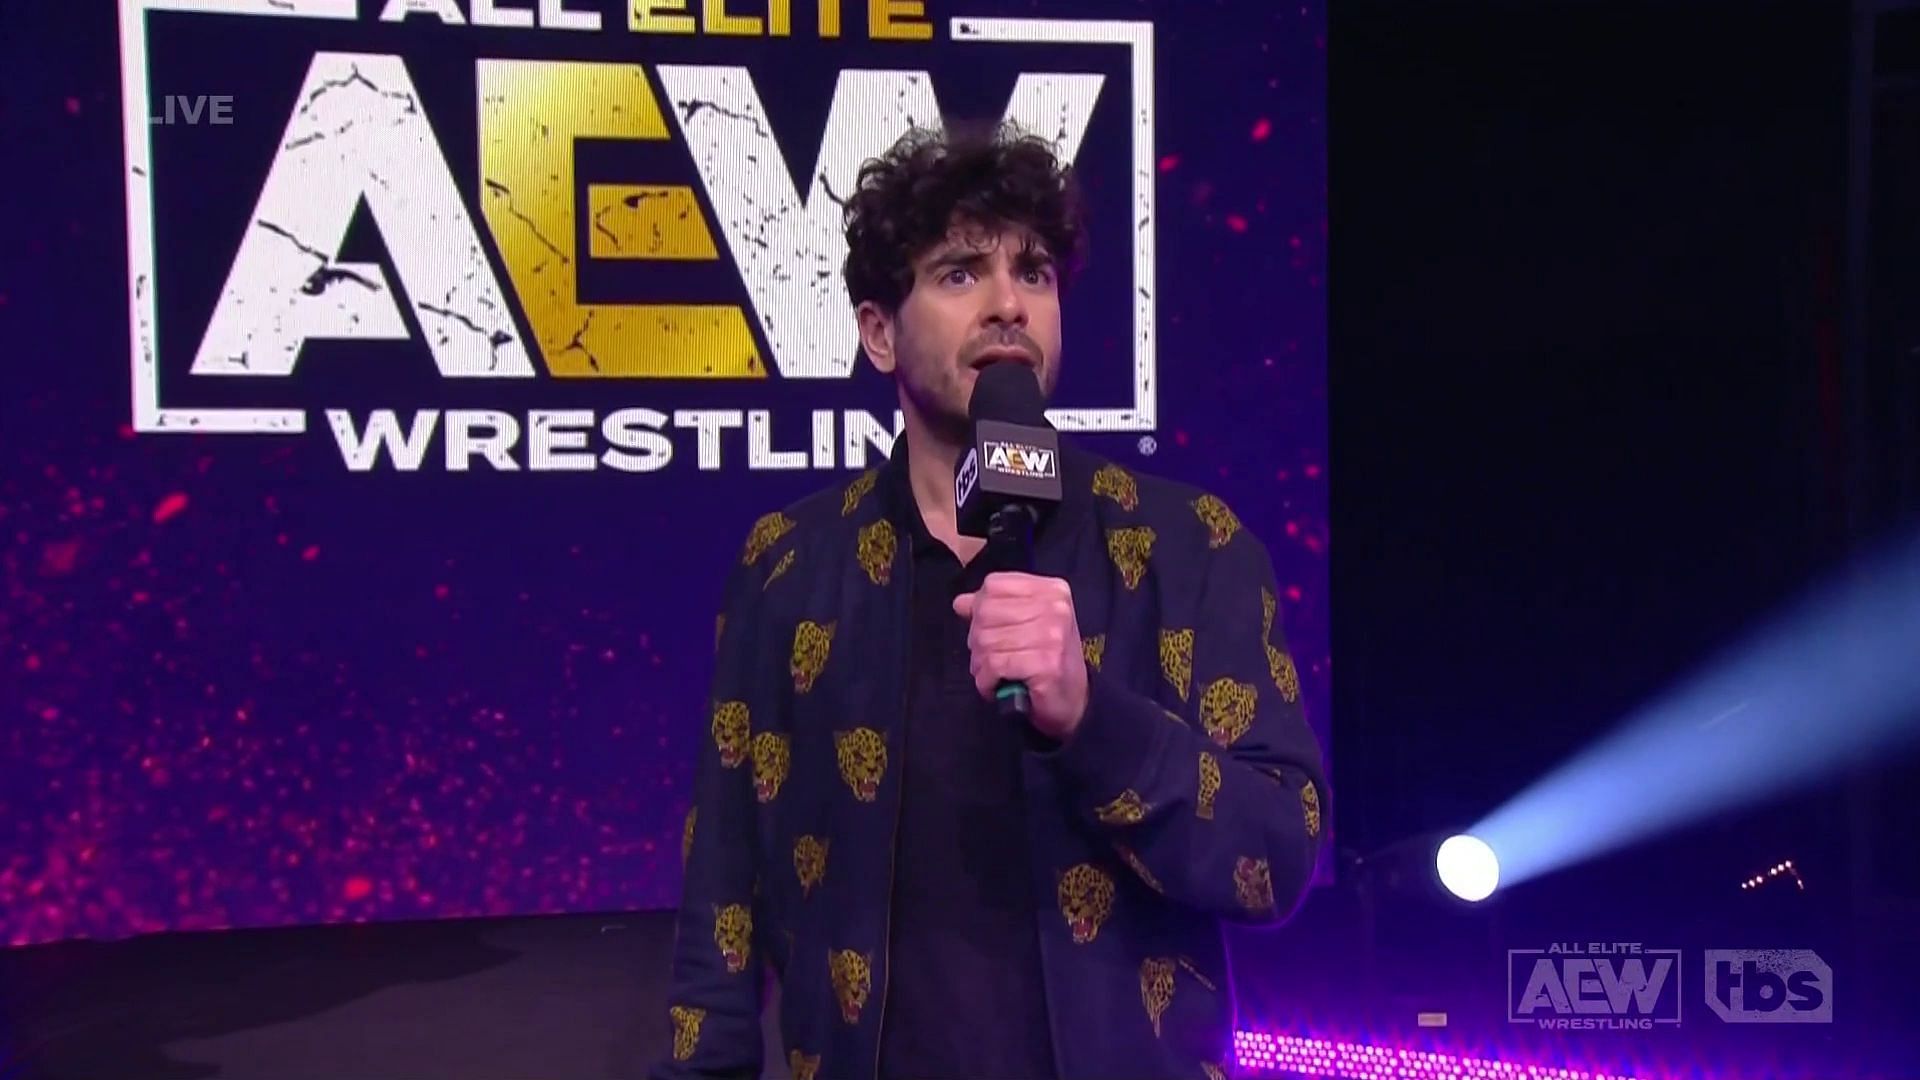 Tony Khan during his announcement this past AEW Dynamite.